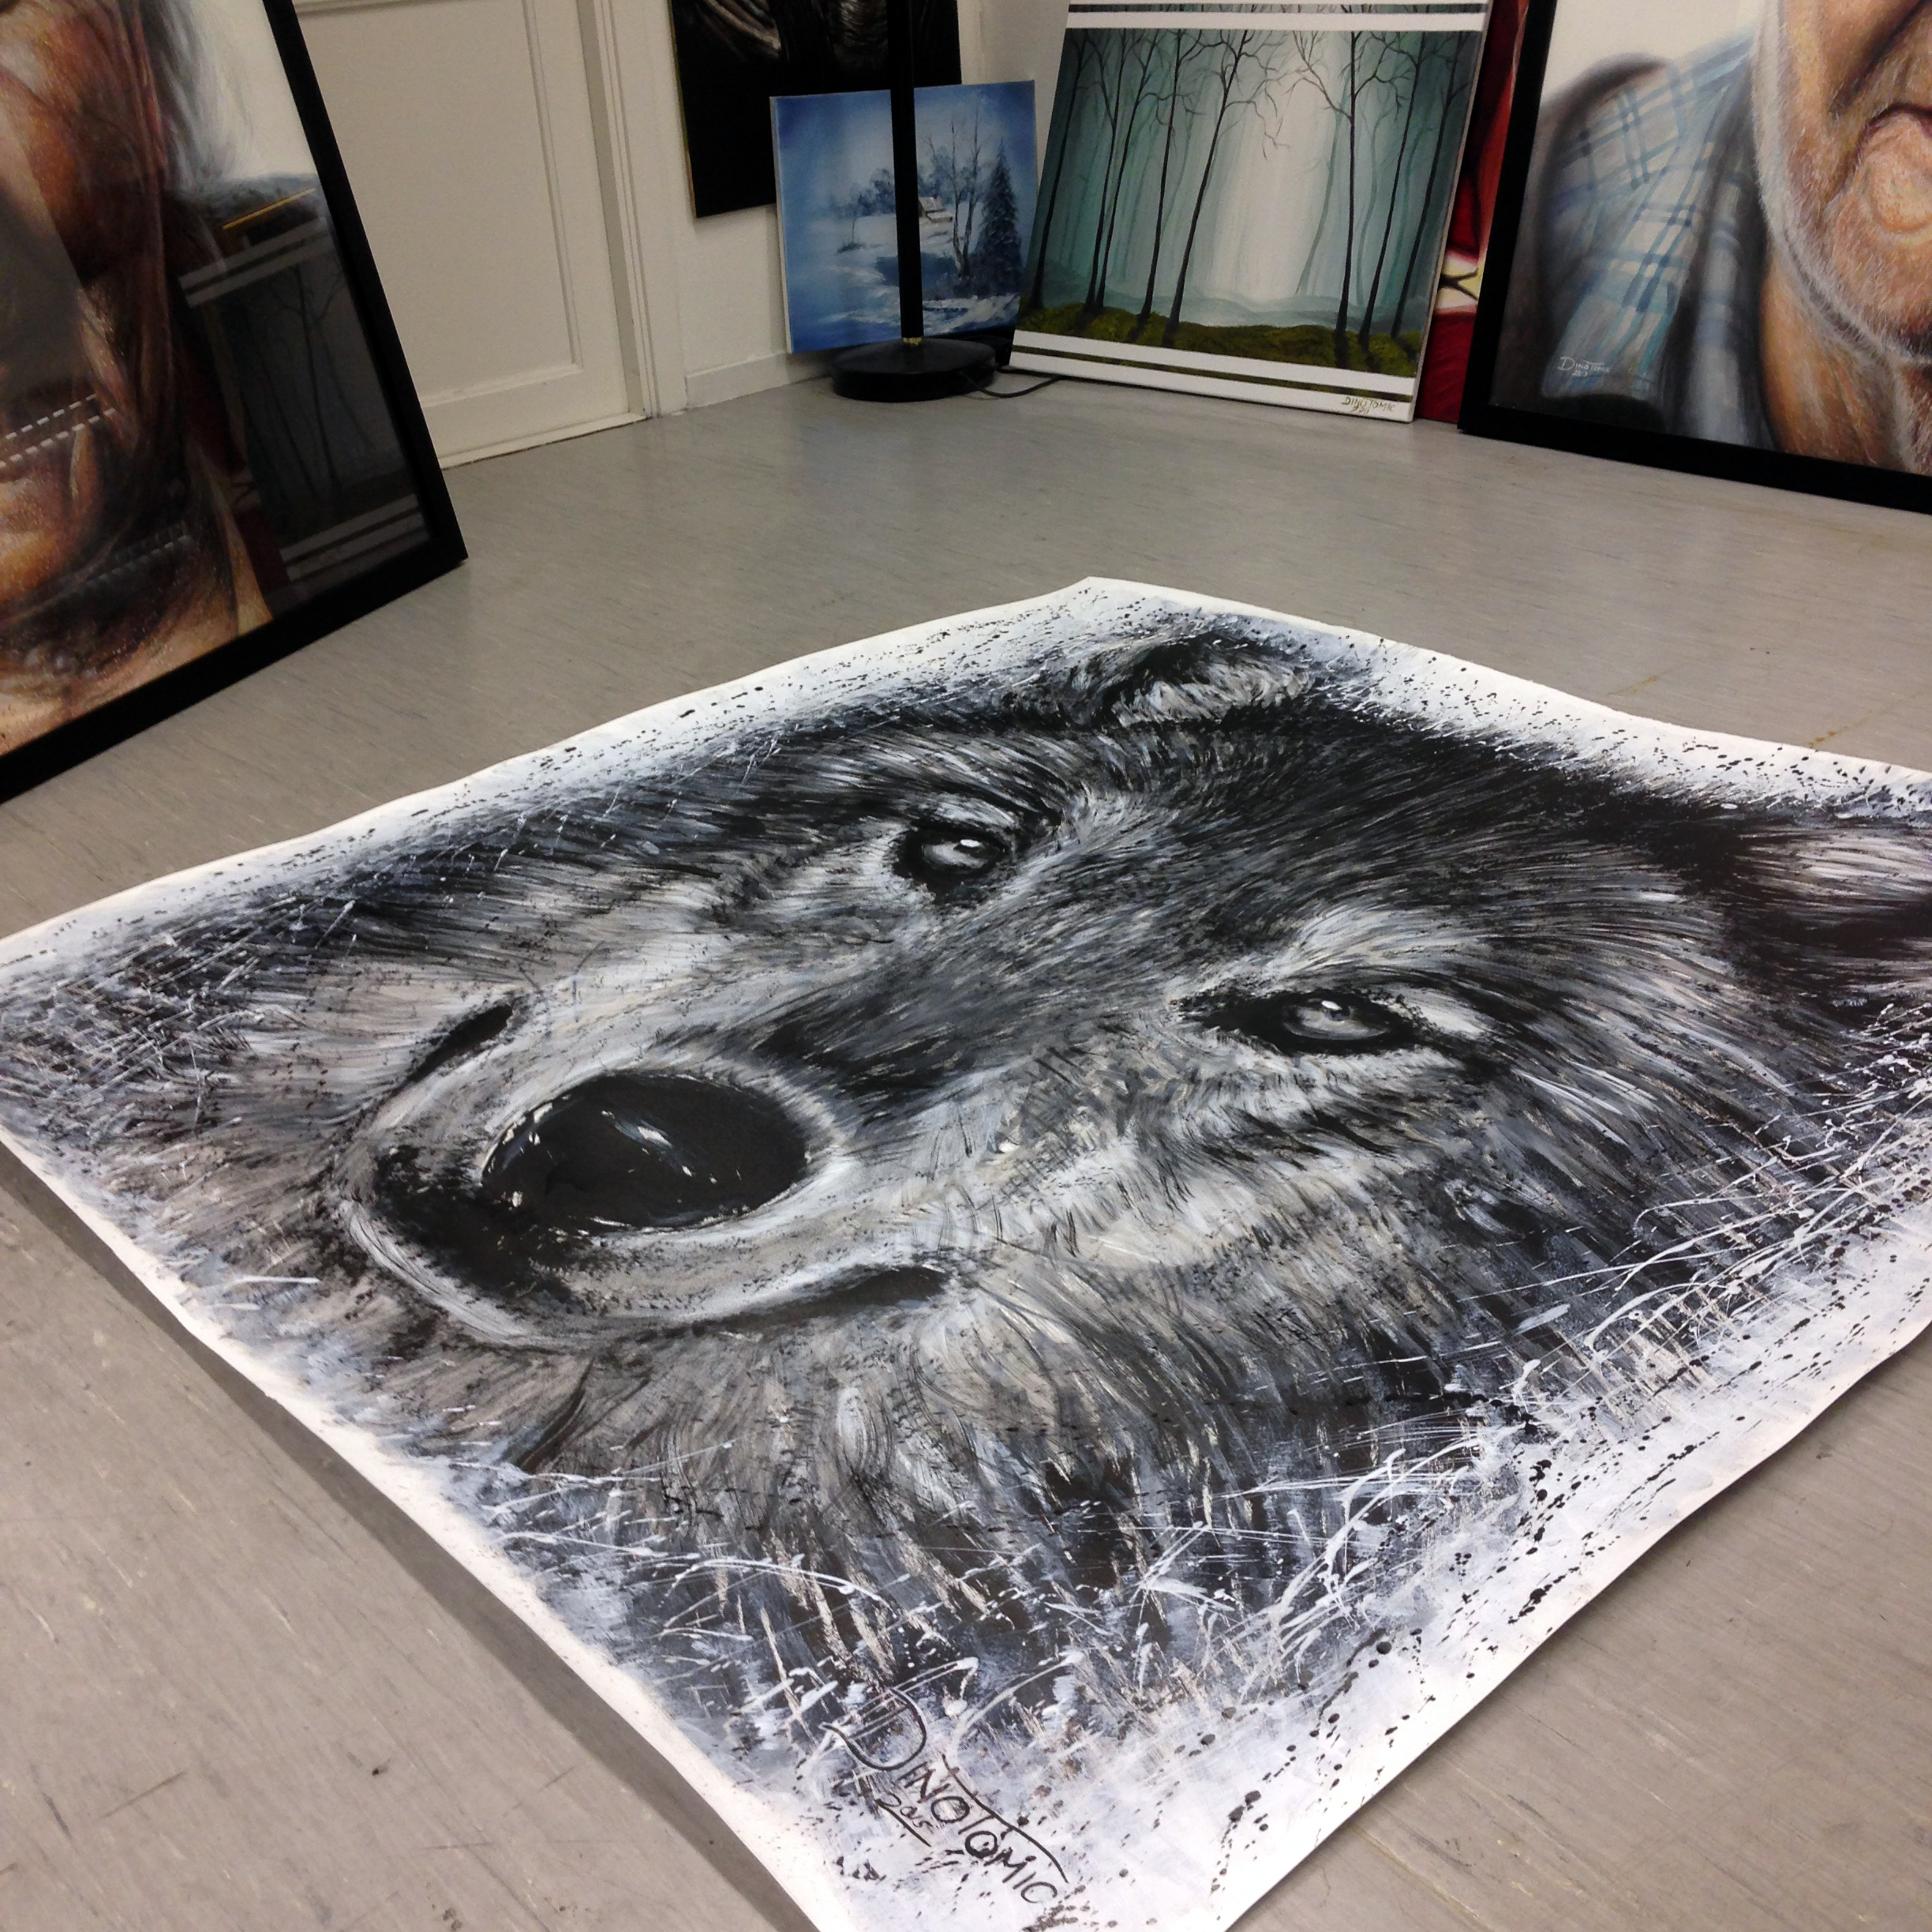 Wolf painting getting a new home by AtomiccircuS on DeviantArt